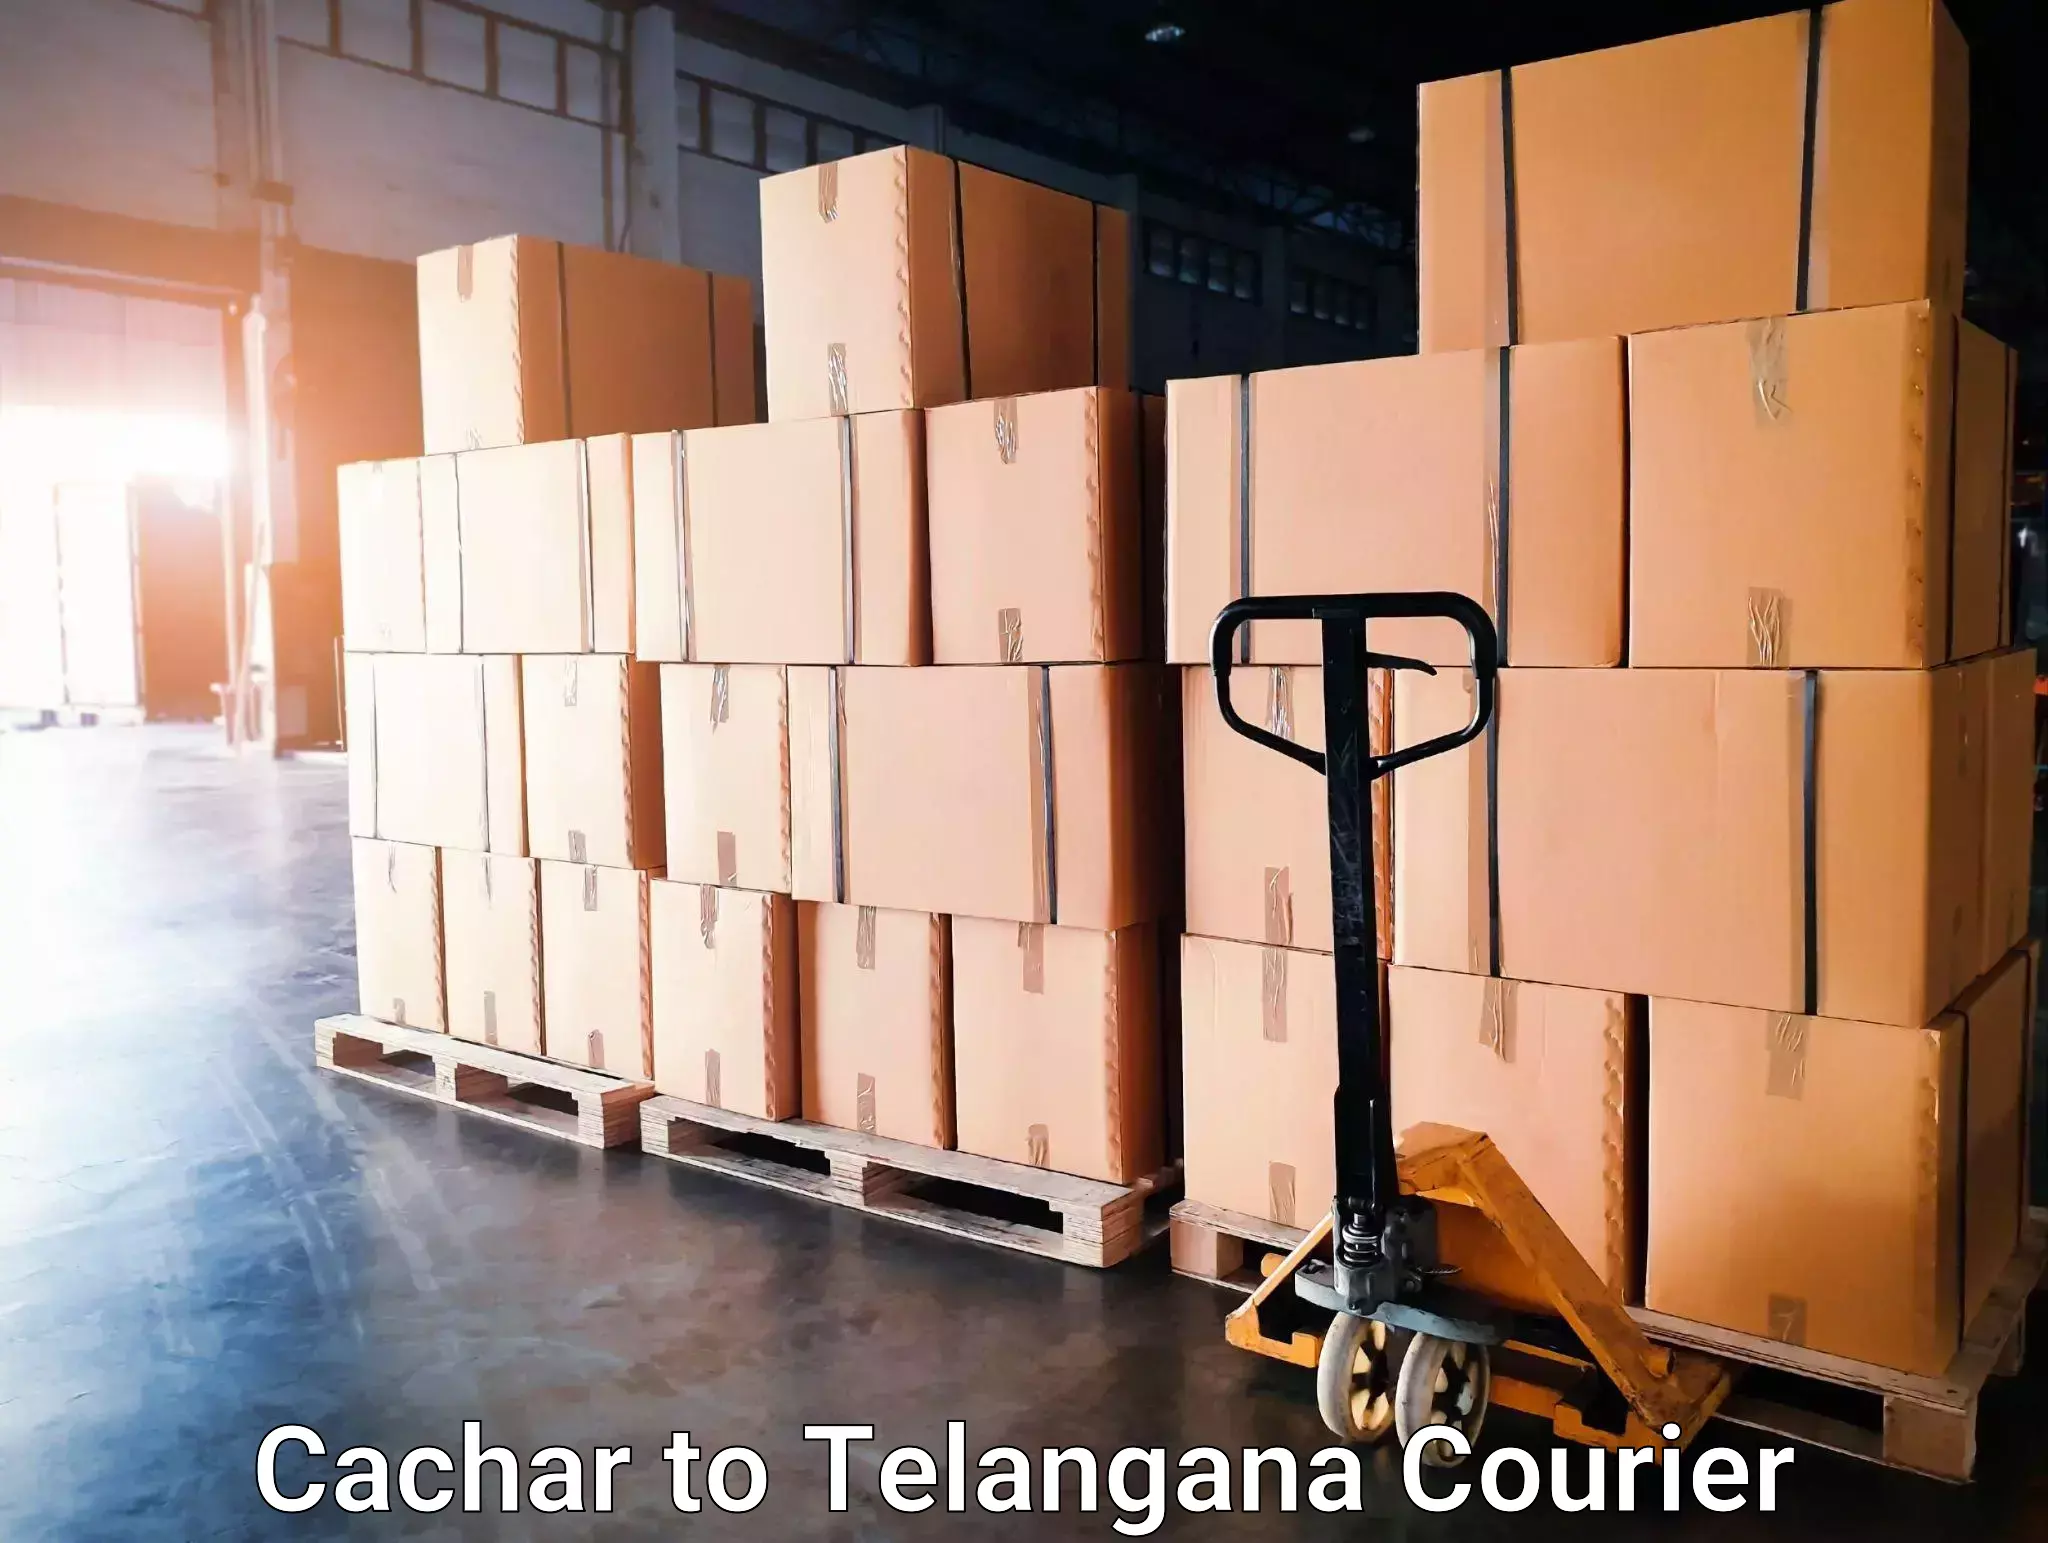 Tailored shipping plans Cachar to Dubbak